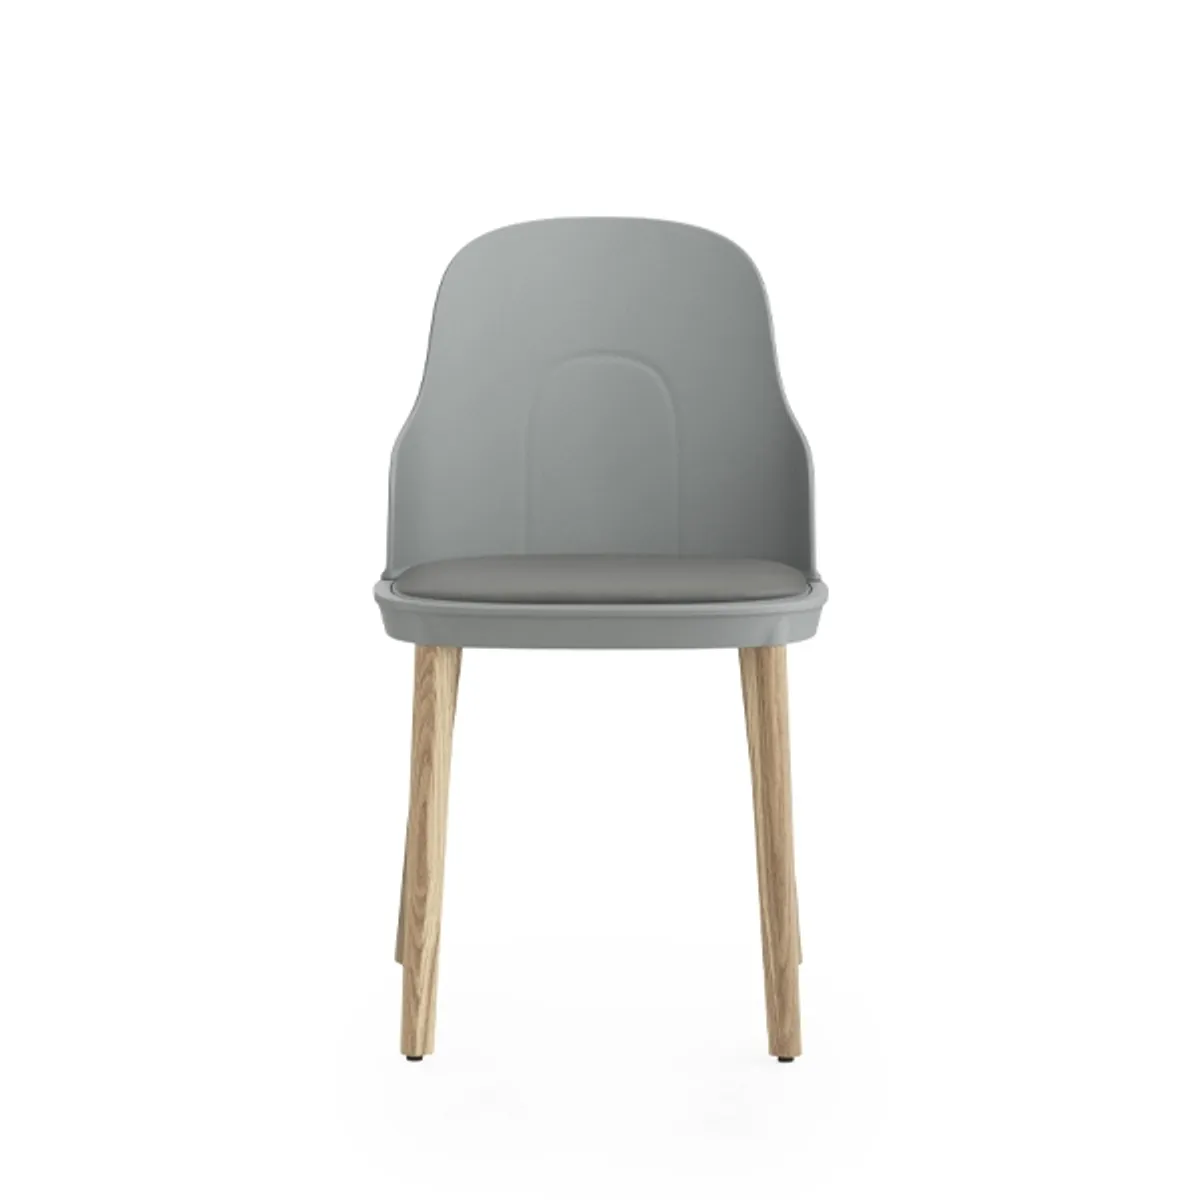 Bon soft wood chair Inside Out Contracts2